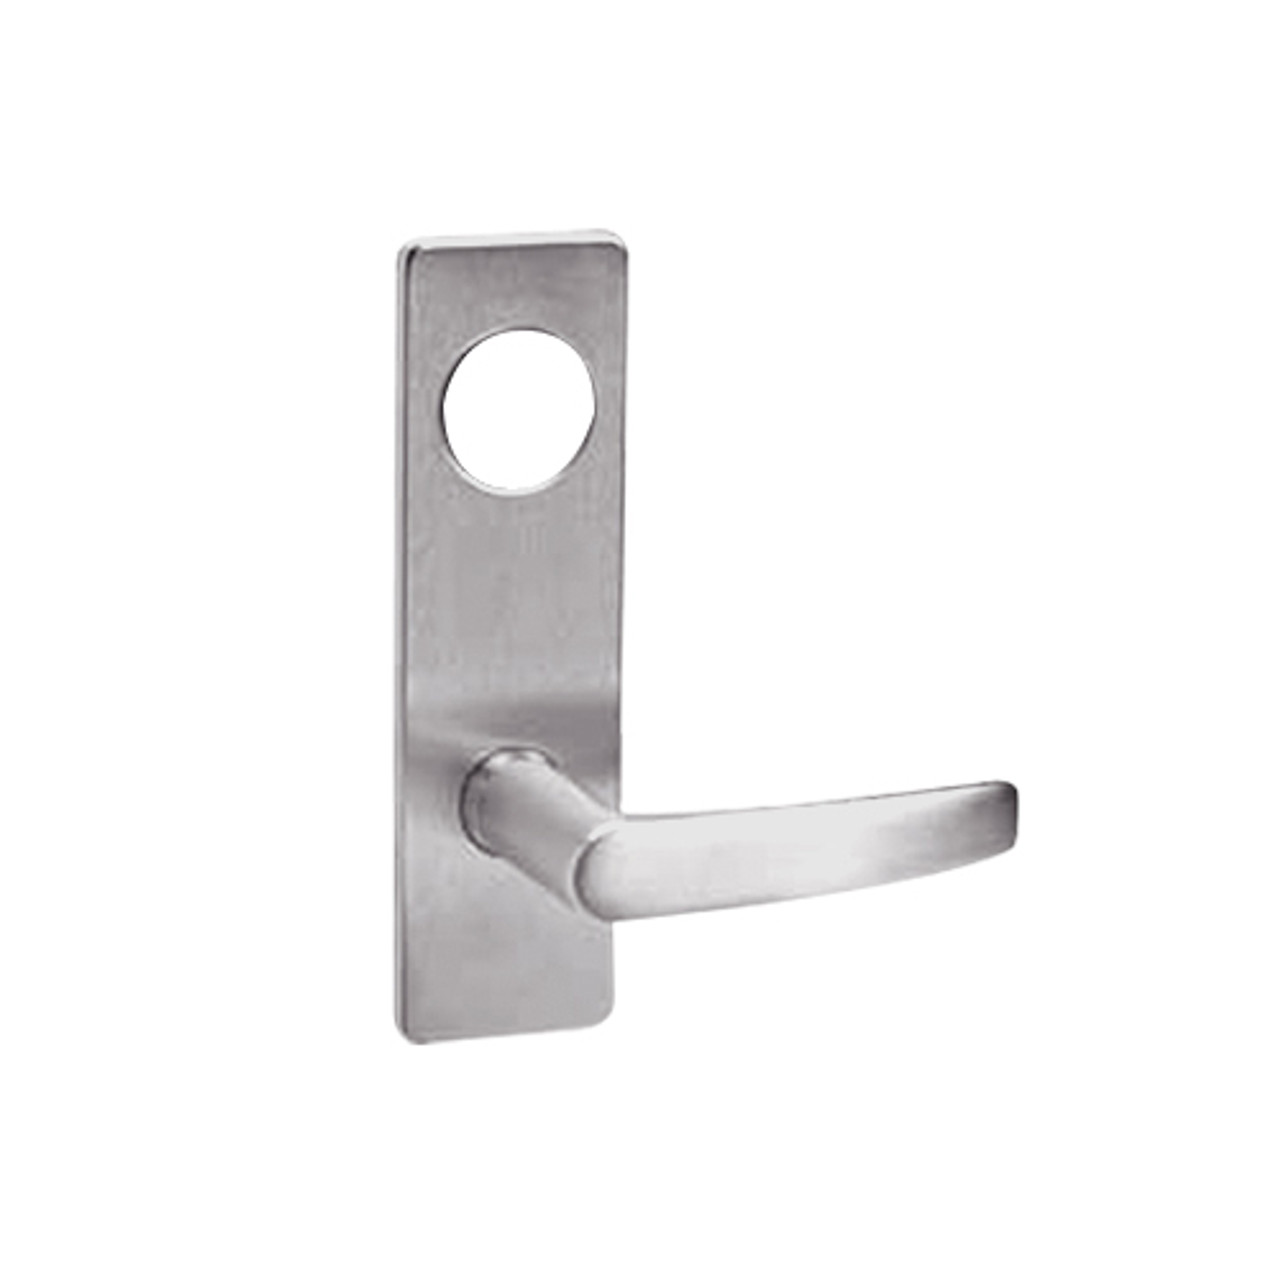 ML2032-ASP-630 Corbin Russwin ML2000 Series Mortise Institution Locksets with Armstrong Lever in Satin Stainless